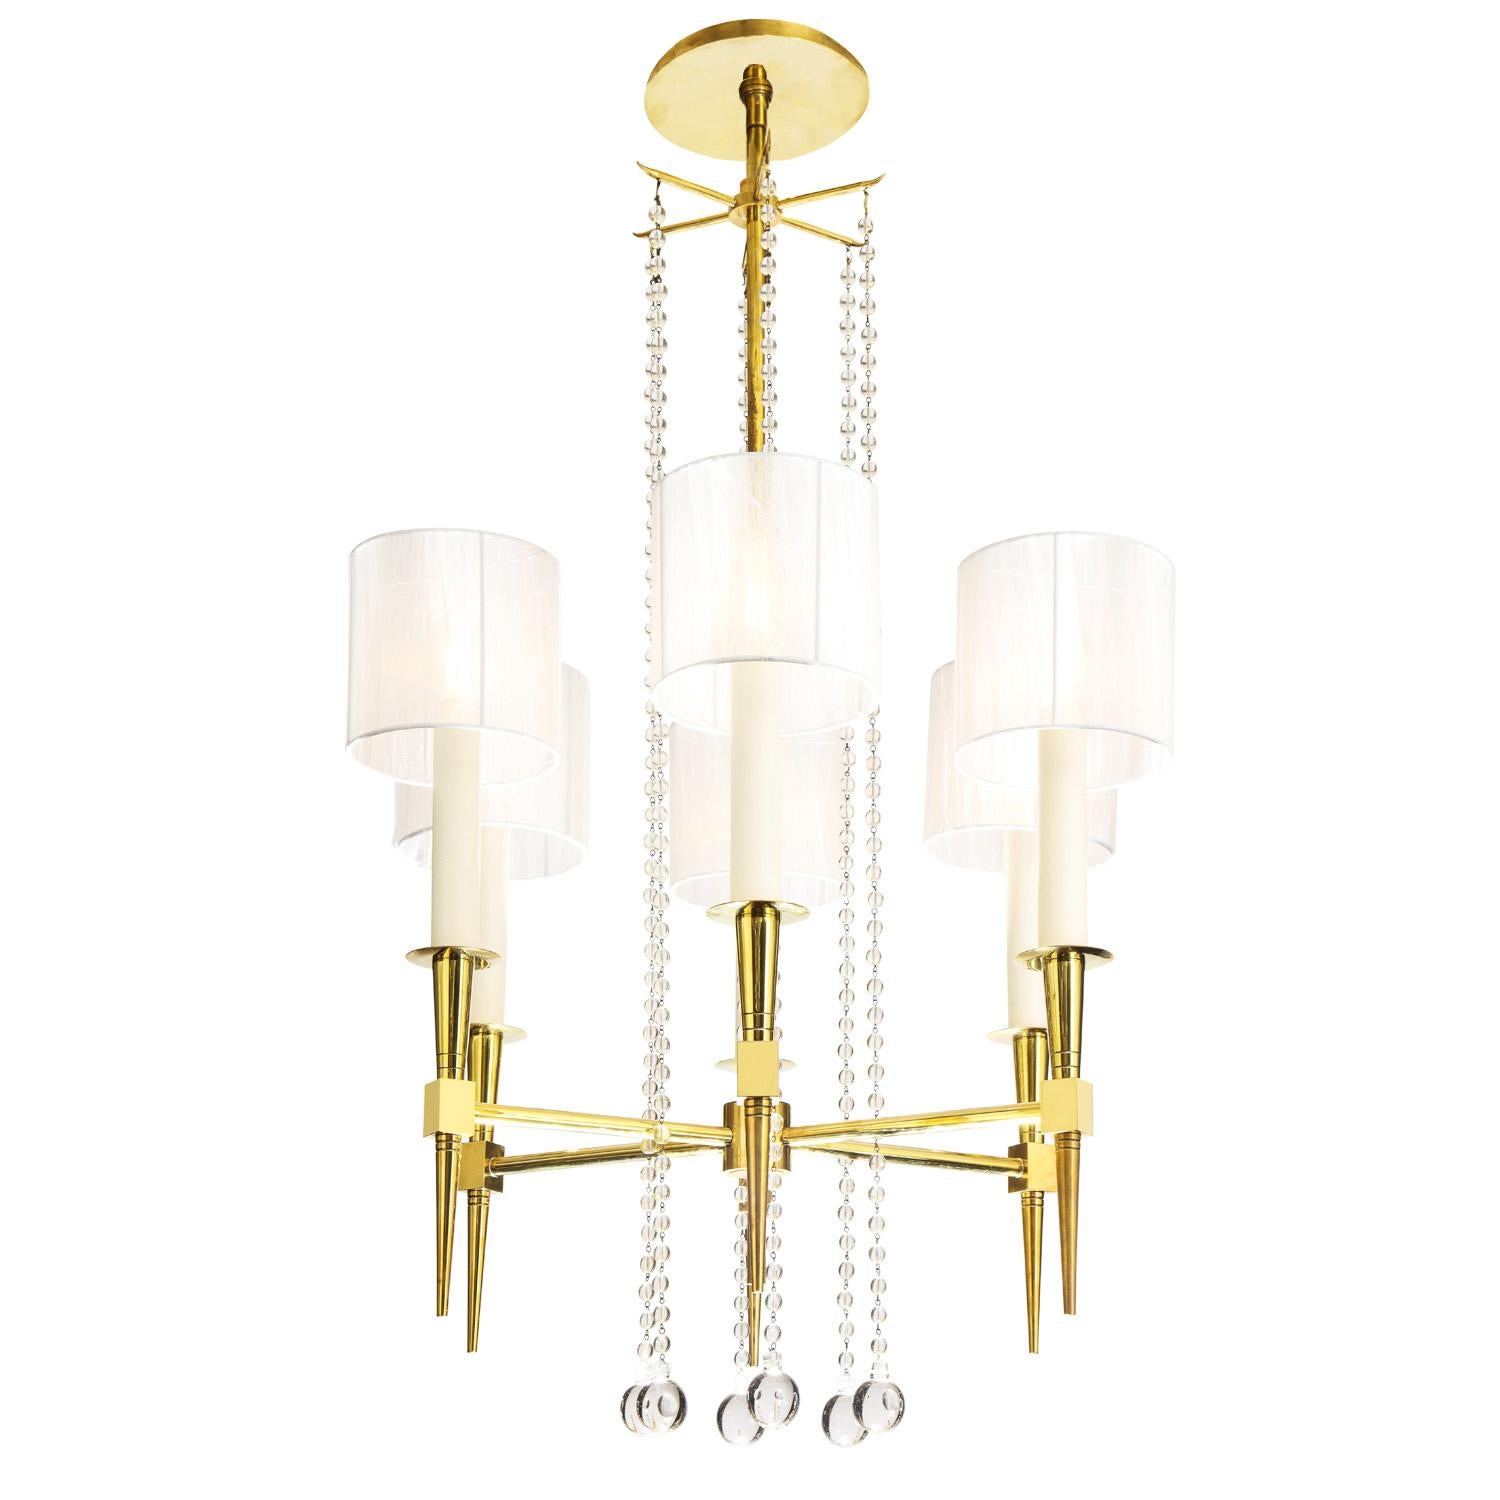 Beautifully crafted 6 arm chandelier model no 1 in brass with suspended crystal beads by Tommi Parzinger for Parzinger Originals, American 1950's. This chandelier is the epidemy of elegance and is an iconic Parzinger design.

Reference:
Parzinger